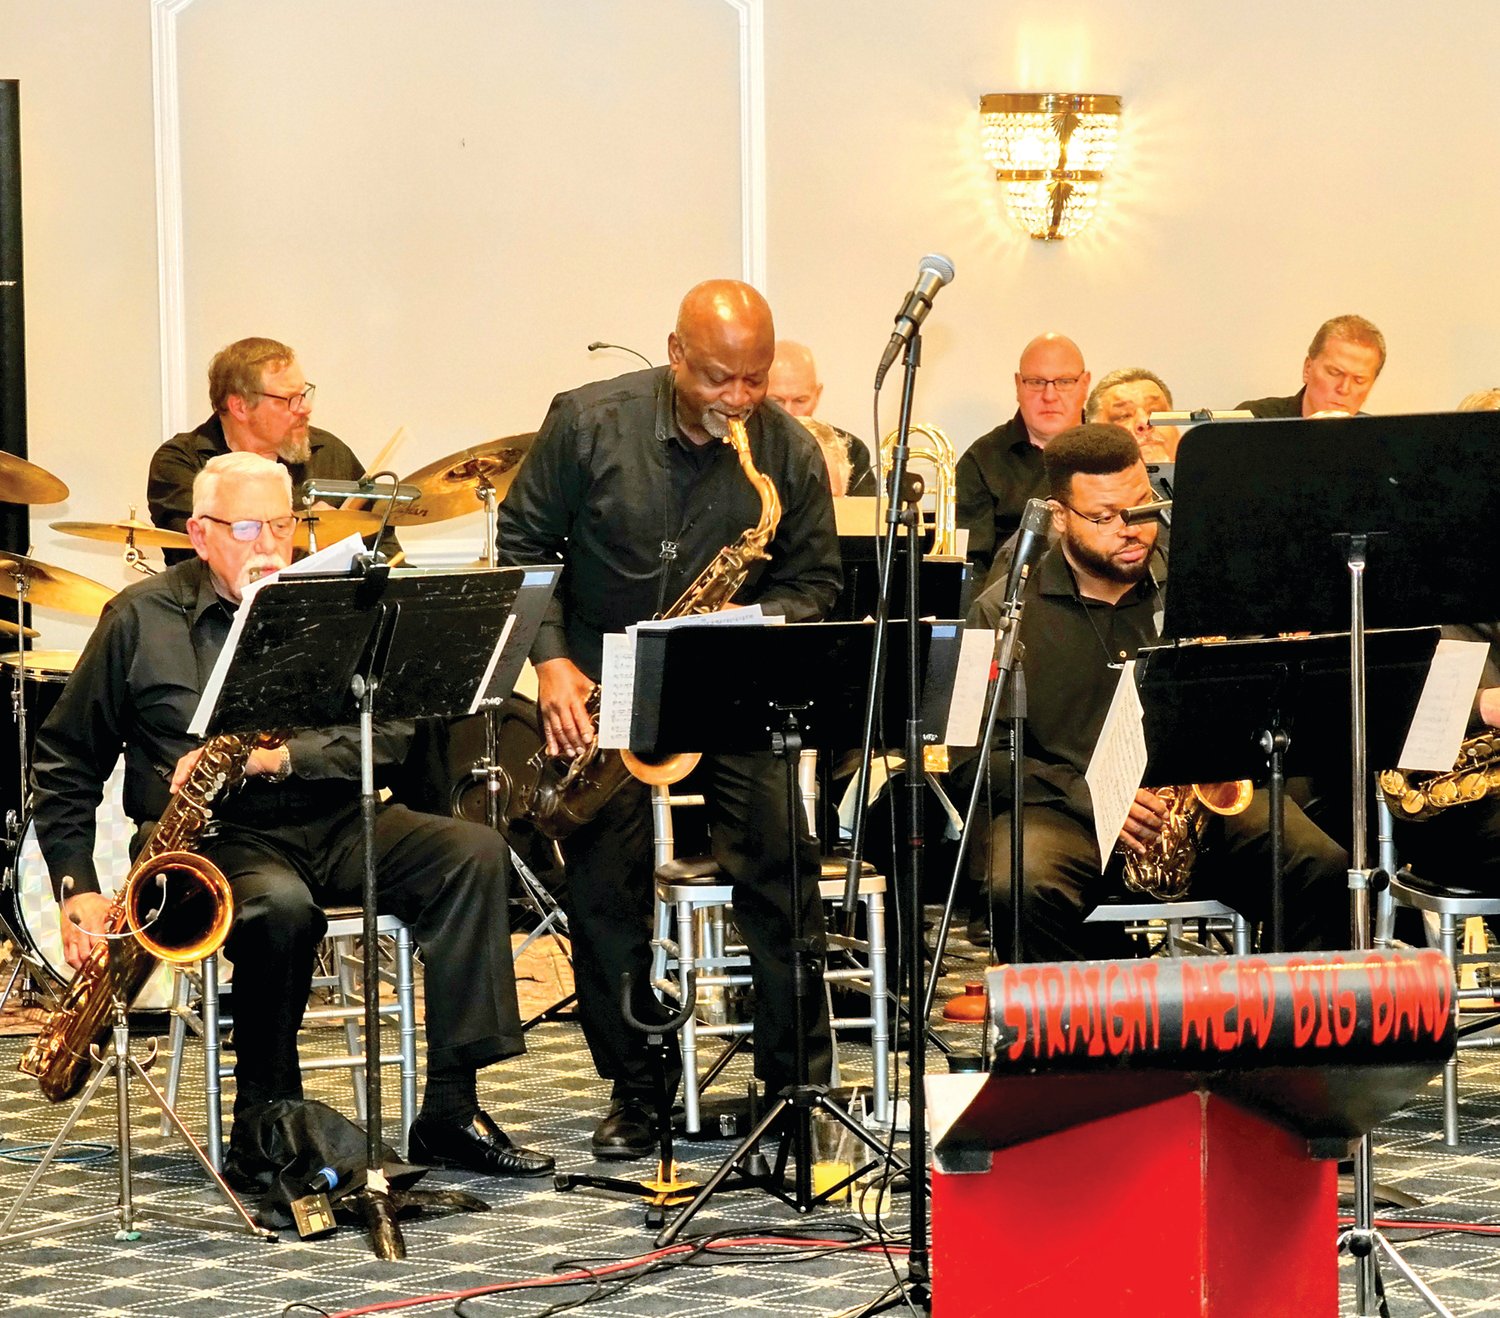 The Straight Ahead Big Band entertains attendees of the The Youth Orchestra of Bucks County's annual benefit on Feb. 25 at Philmont Country Club in Lower Moreland.